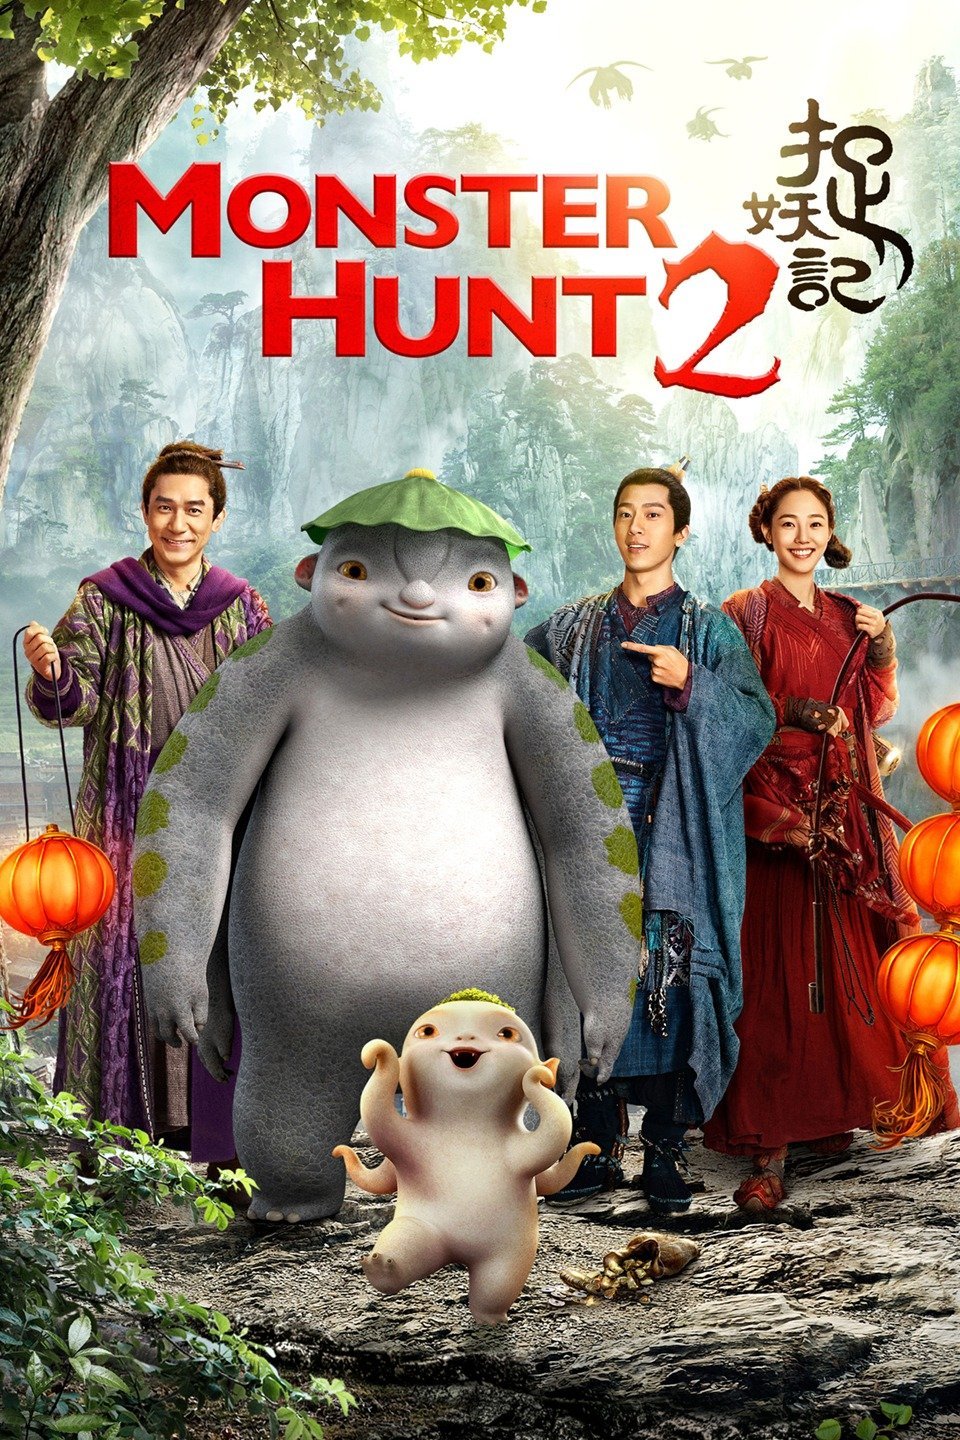 Monster Hunt 2 (2018): Delightful Movie for Those who Want to be  Entertained – The Lady in Pink